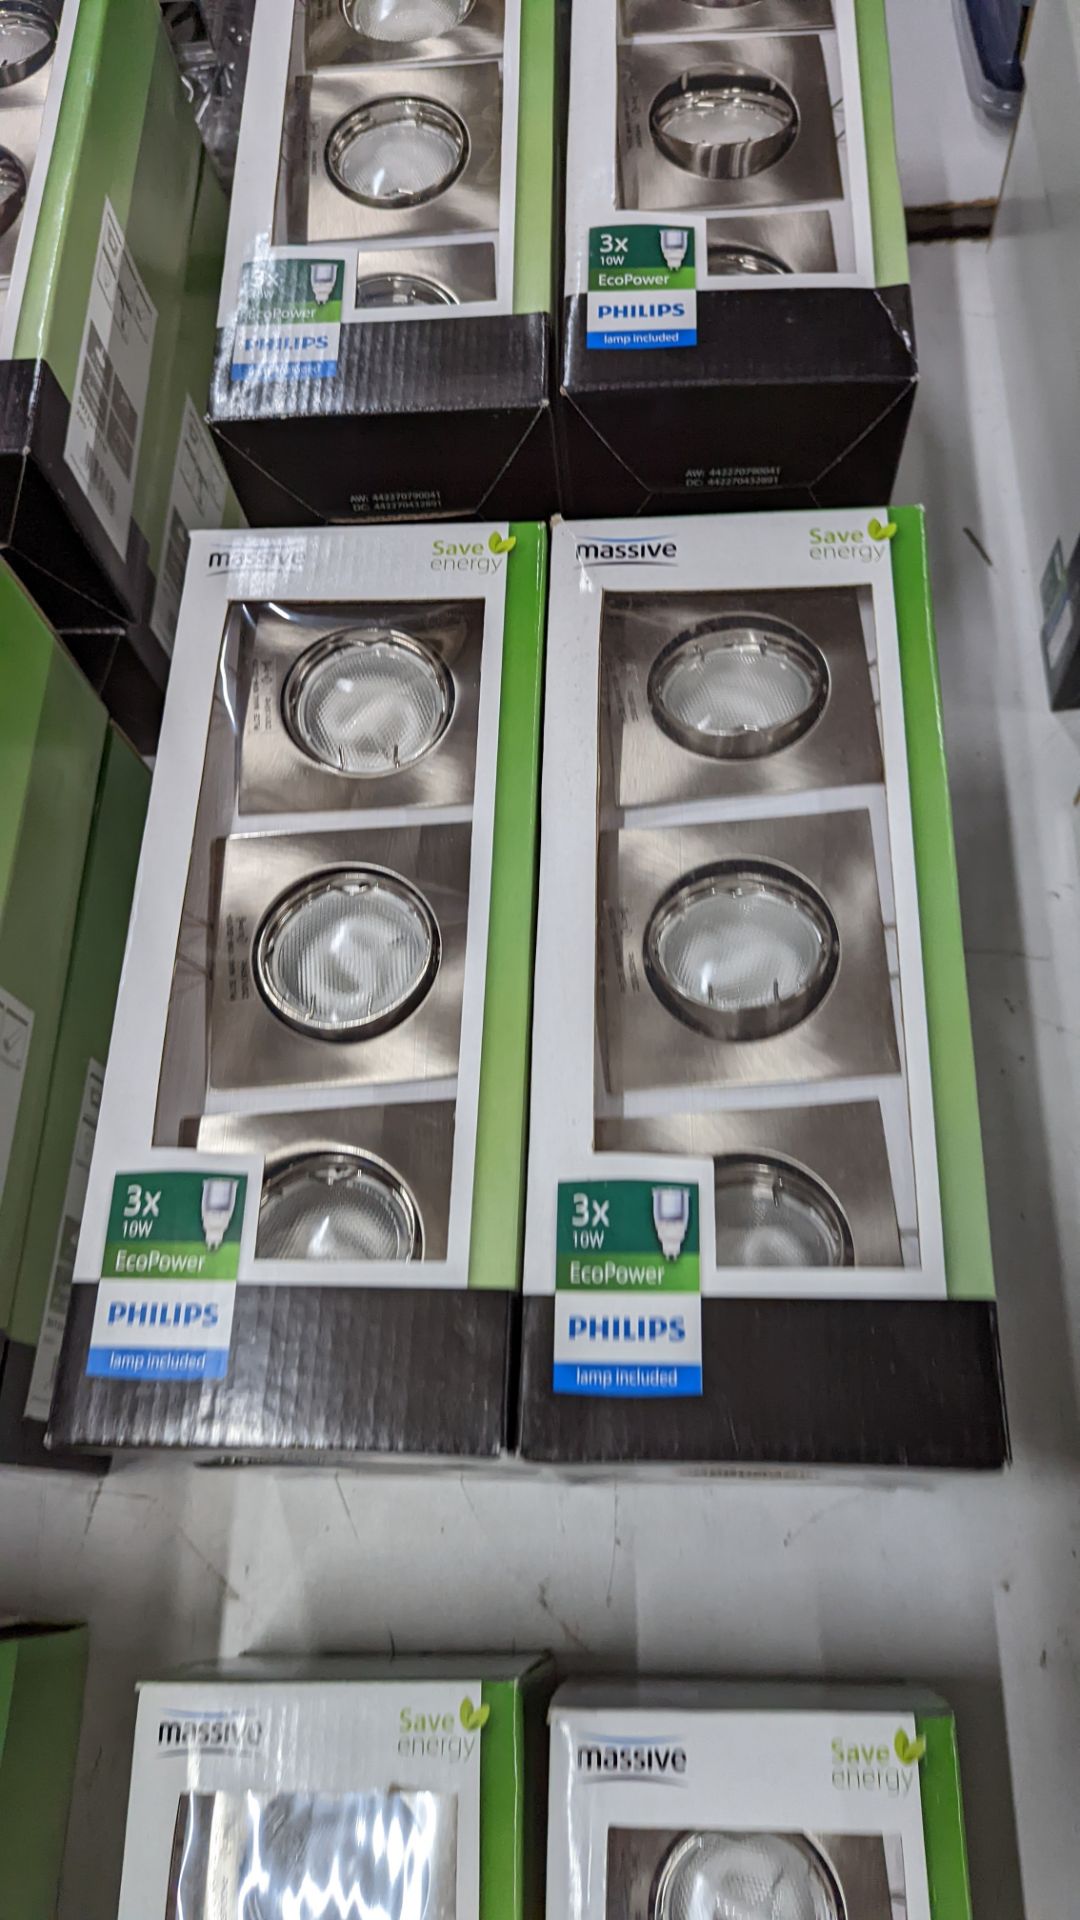 10 off Philips 3x10w Eco Power brushed chrome LED spotlights - this lot consists of 10 boxes which e - Image 4 of 5